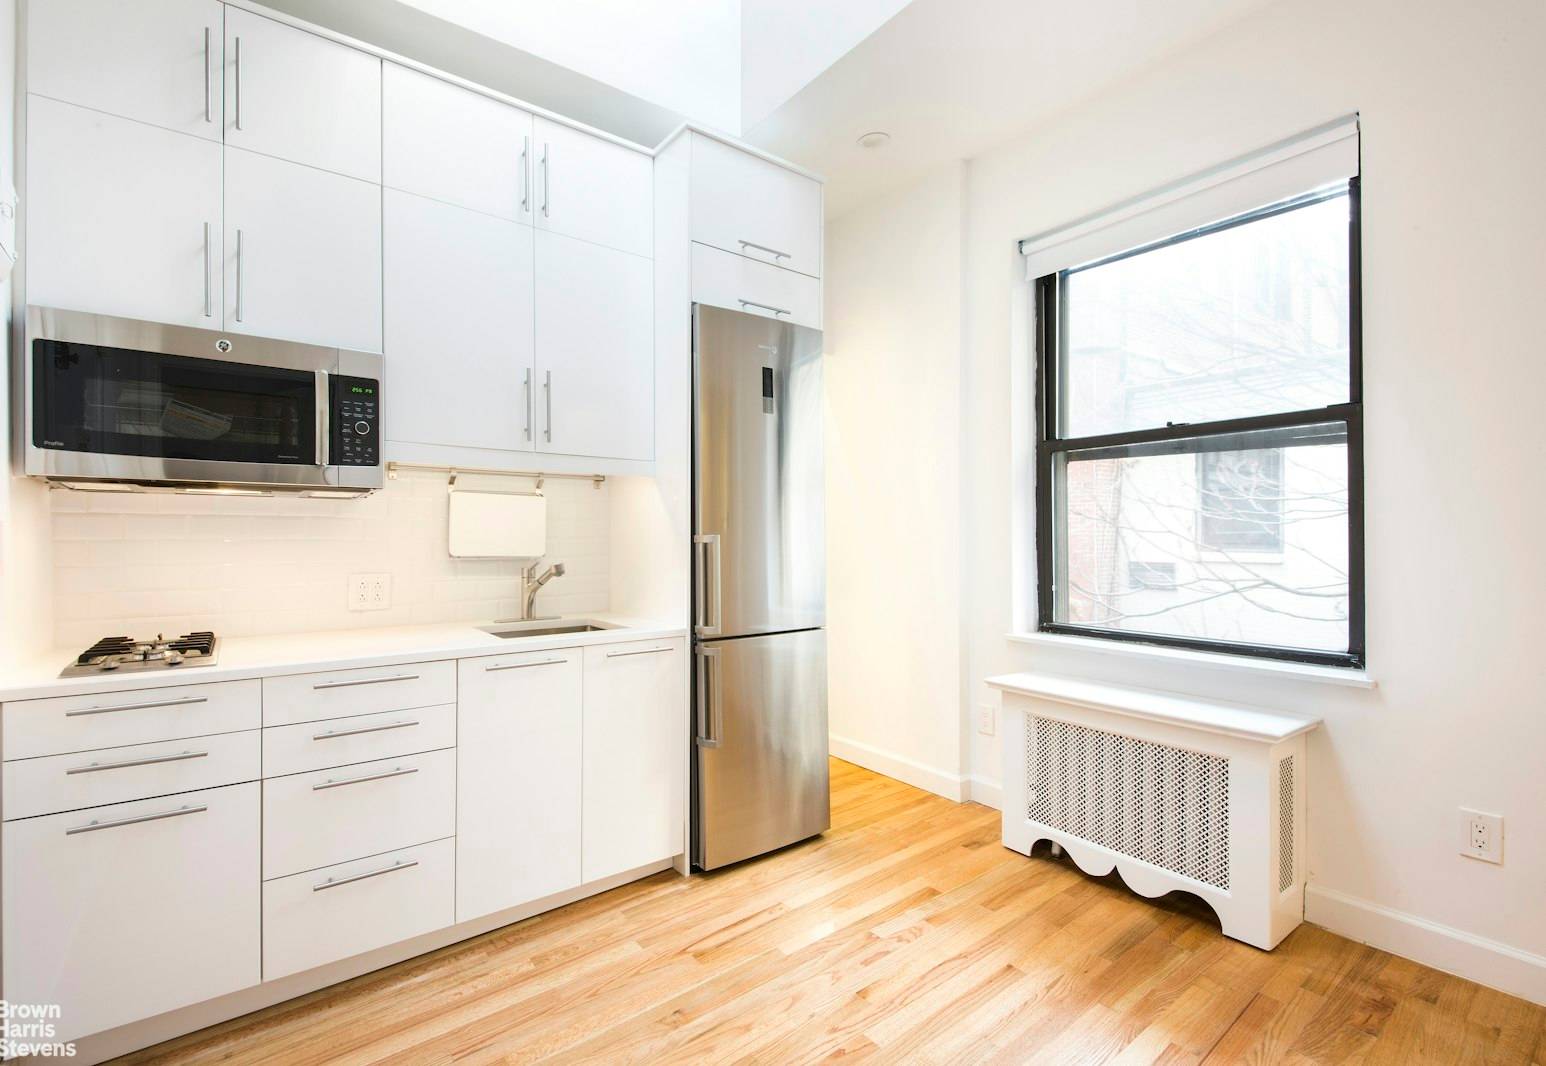 SUNNY BROWNSTONE HOMEGreat opportunity to get a one bedroom flex two bedroom with two full bathrooms in a stellar Upper Westside location.